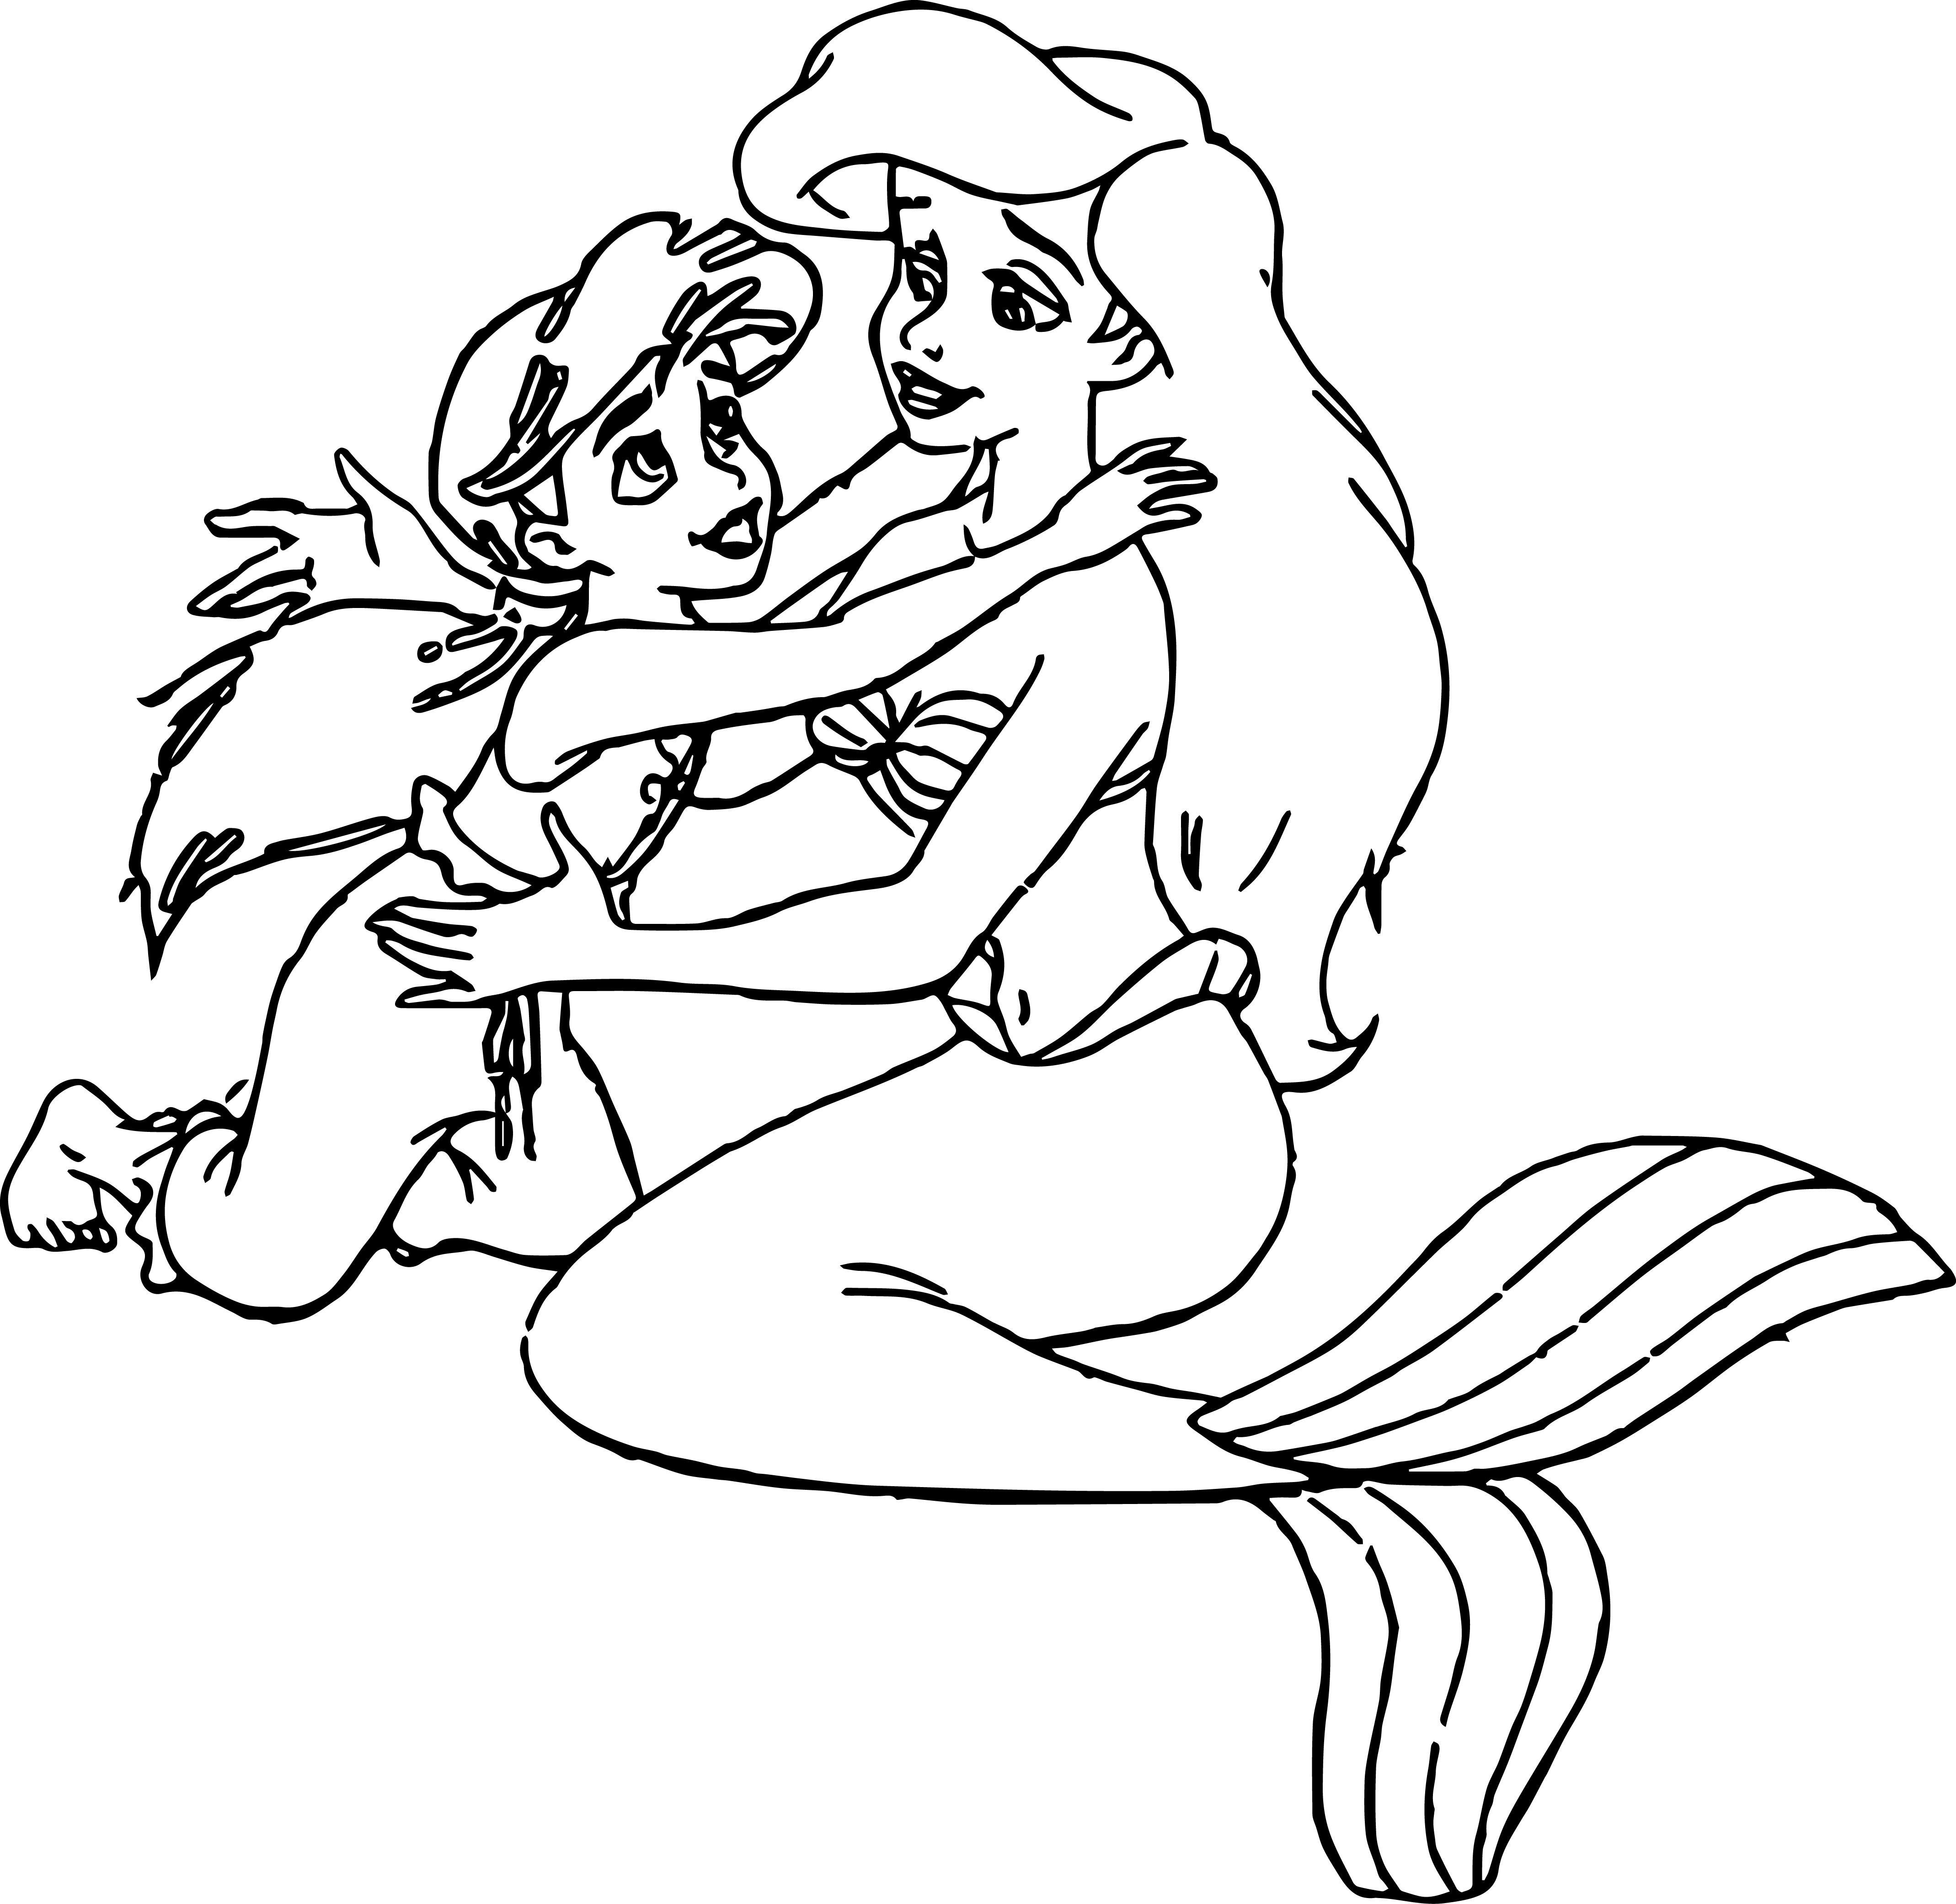 Disney The Little Mermaid 2 Return to the Sea Coloring Page ...